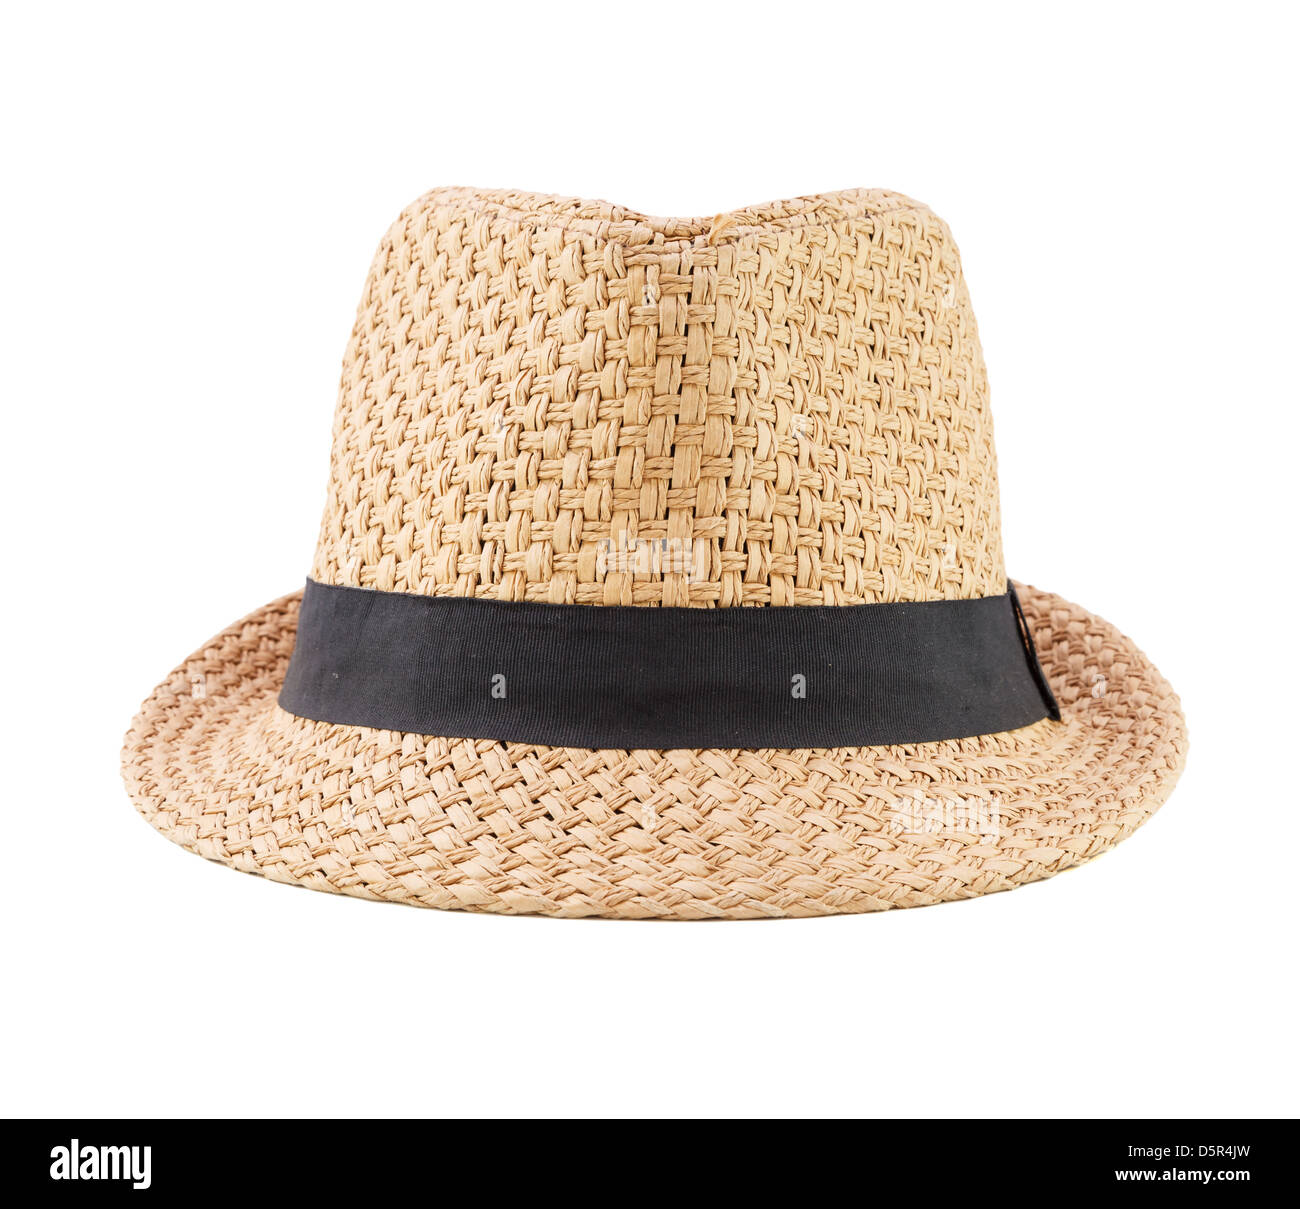 A woven fashion hat isolate on white background Stock Photo